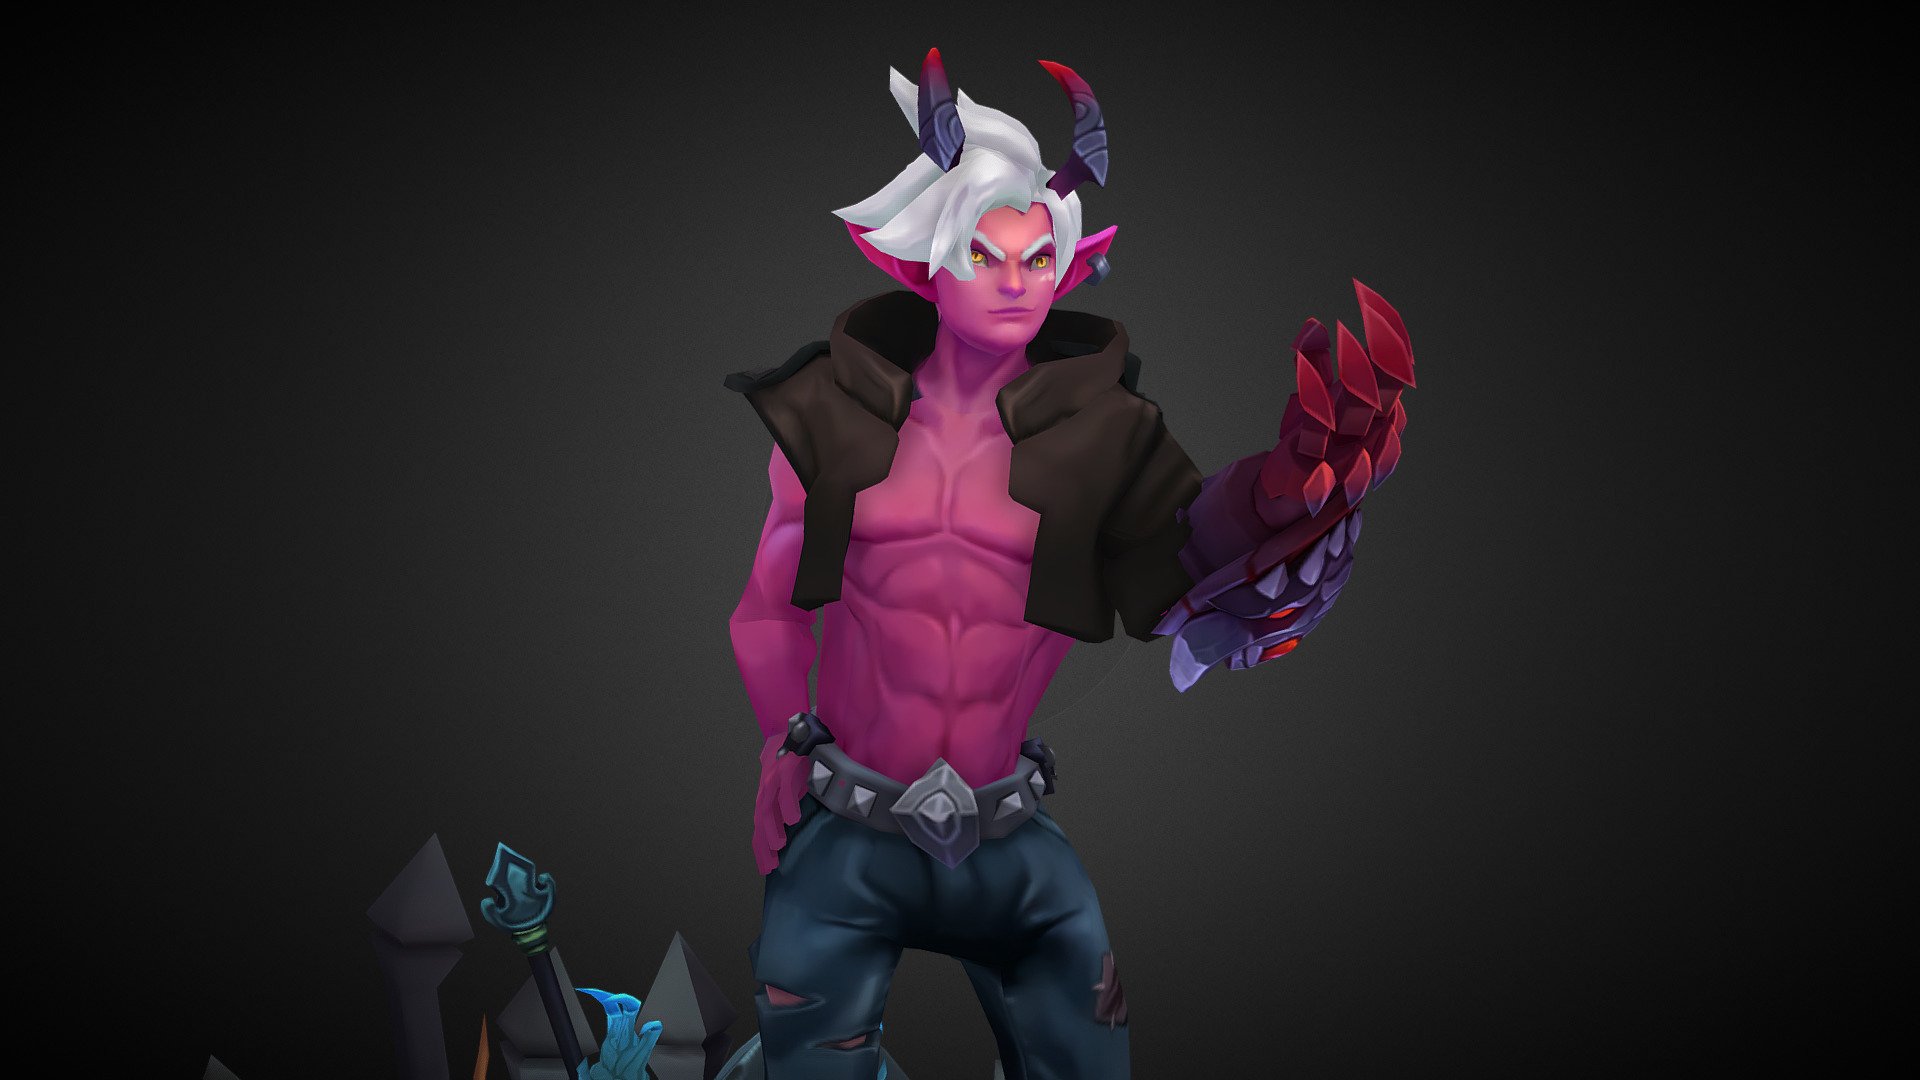 Joining in on Skintober 2020, not with drawings, but models to possible future custom skins! I’m following the prompt list by RaiPhantom and KateyAnthoney

Done with Maya 2018 and Photoshop. The Podium was done with the help of Damonix.

Parts used: Battle Boss Yasuo, Arcade Ezreal, Demon Vi, Renegade Talon © Riot Games

Support me on Ko-Fi if you want :) https://ko-fi.com/yoruqueenofnight - Skintober 2020 Day 6: Demon Ezreal - 3D model by Yoru Skins (@YoruSkins) 3d model